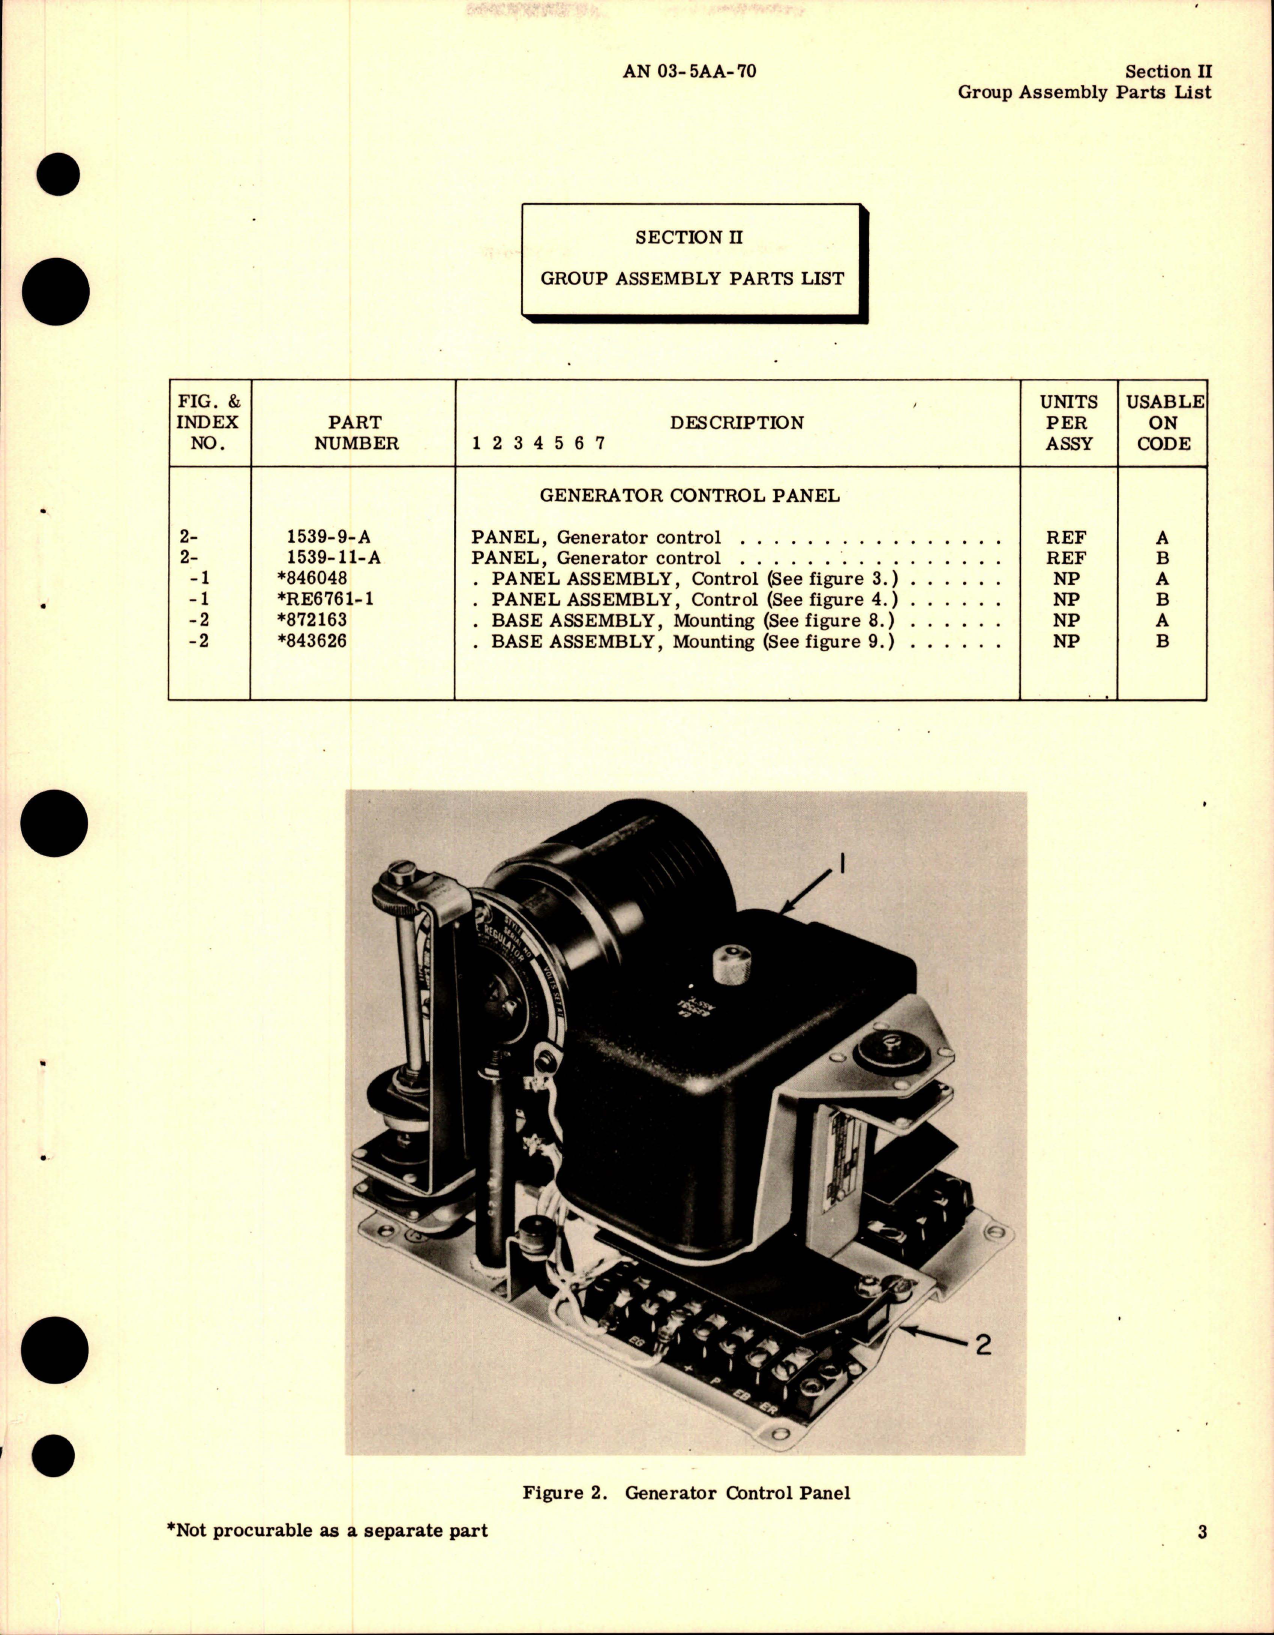 Sample page 7 from AirCorps Library document: Illustrated Parts Breakdown for Generator Control Panel - Type 1539-9-A and 1539-11-A 